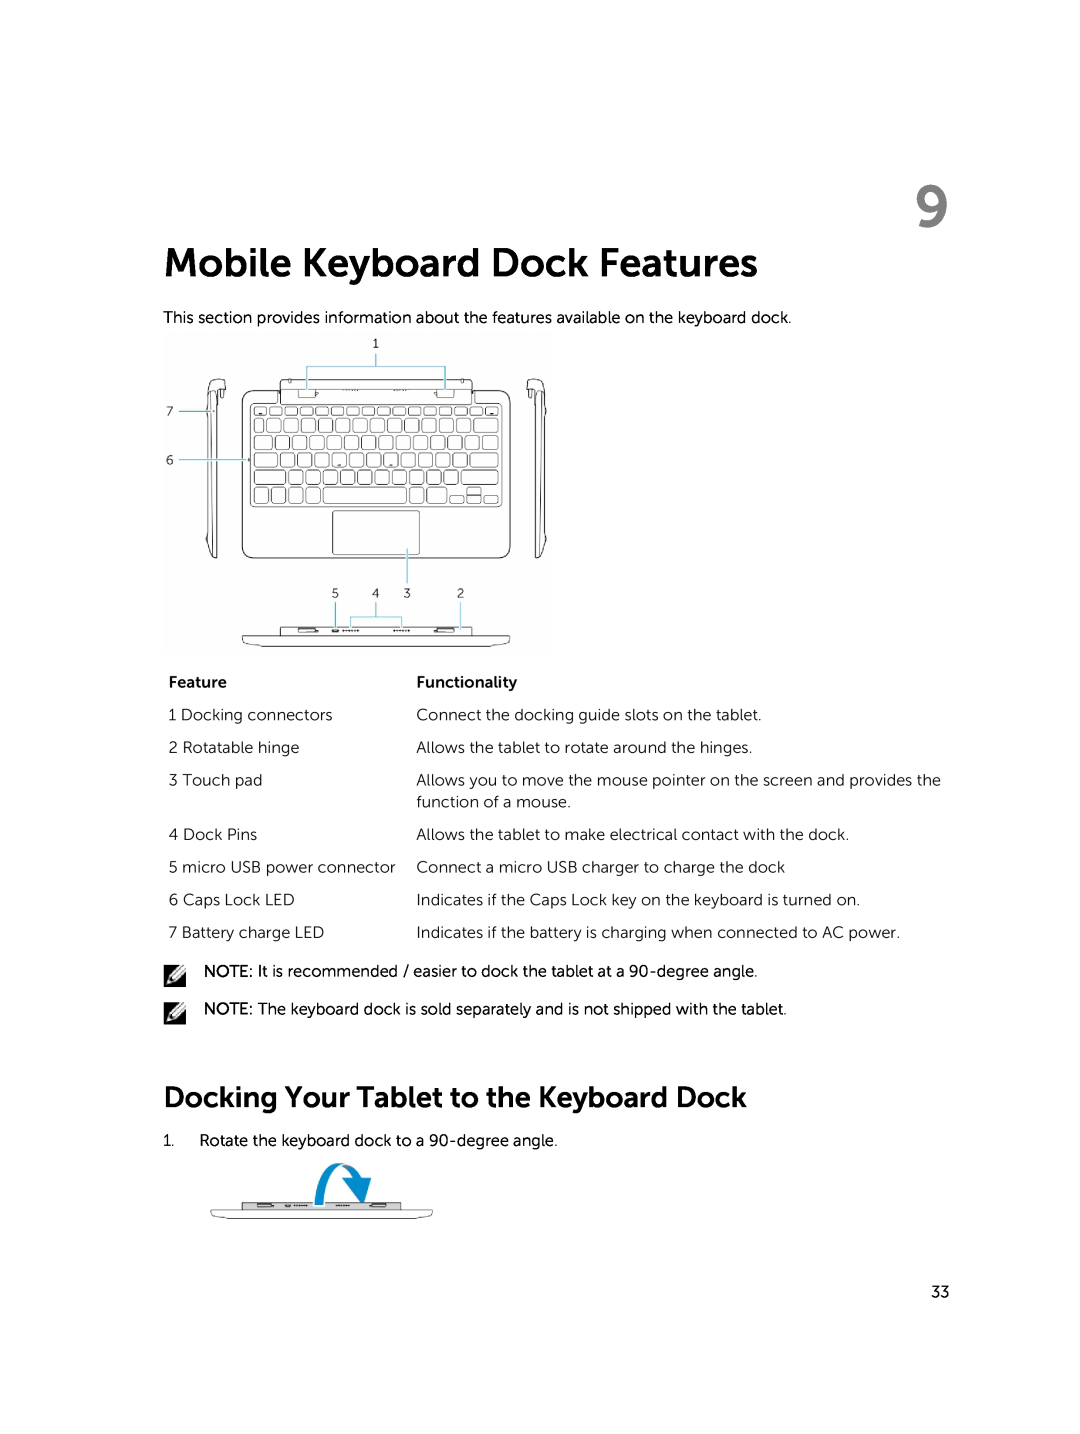 Dell T06G manual Mobile Keyboard Dock Features, Docking Your Tablet to the Keyboard Dock 